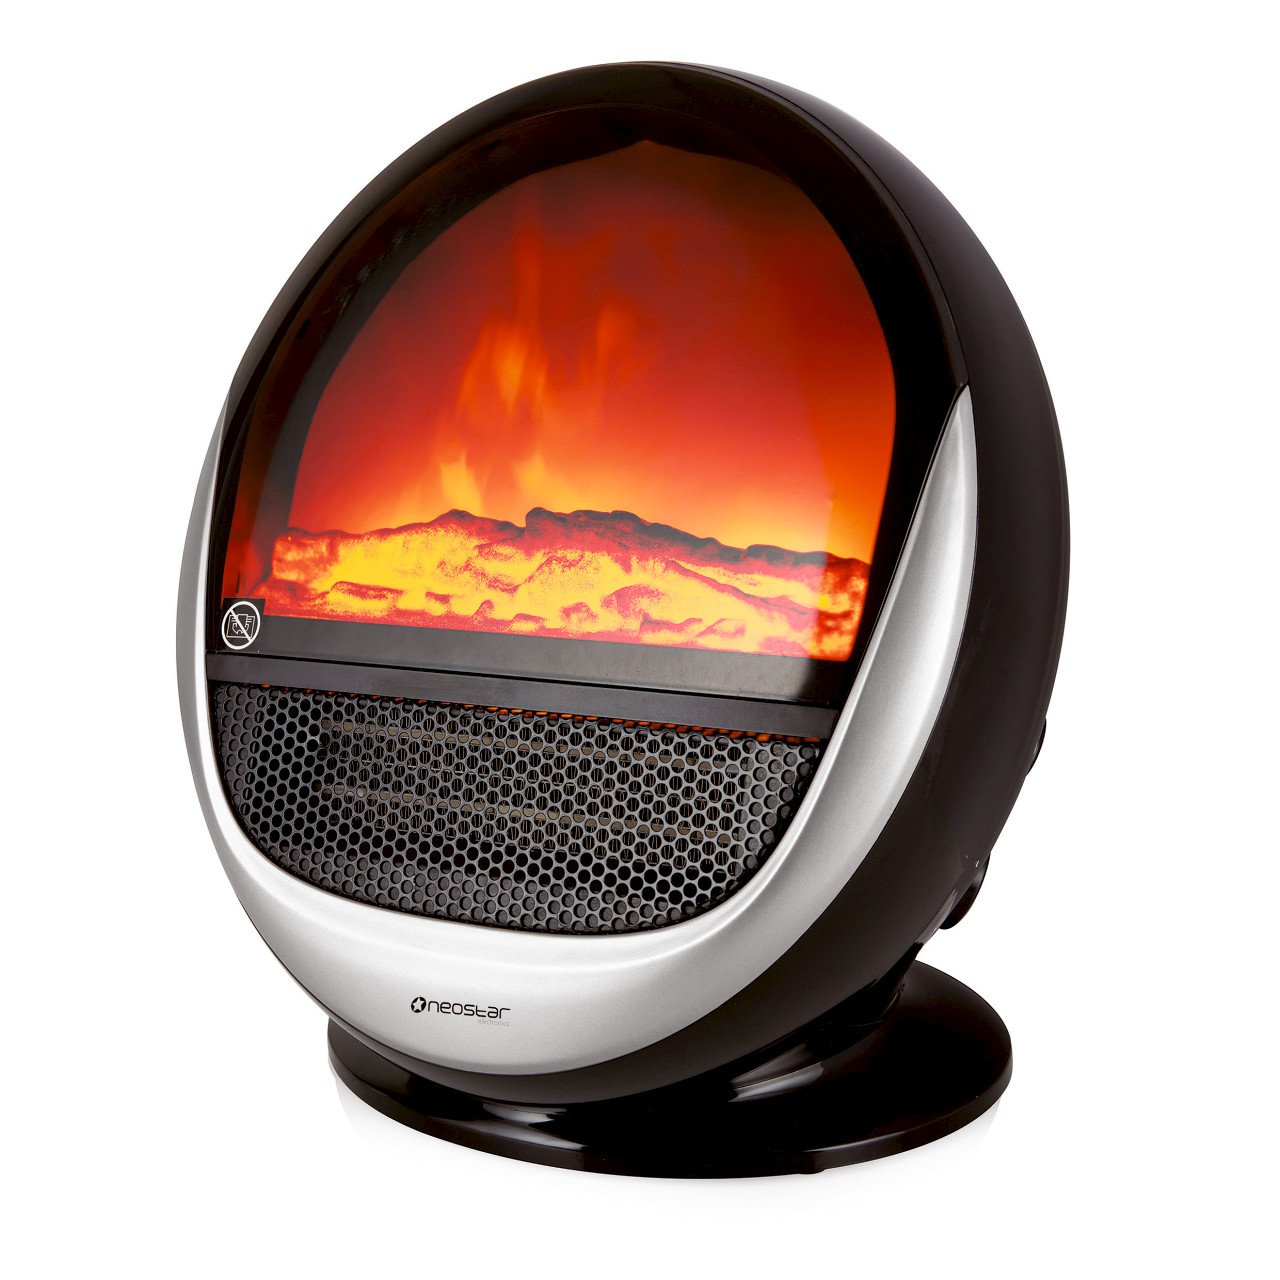 Neostar® Portable Ceramic Flame-effect Heater